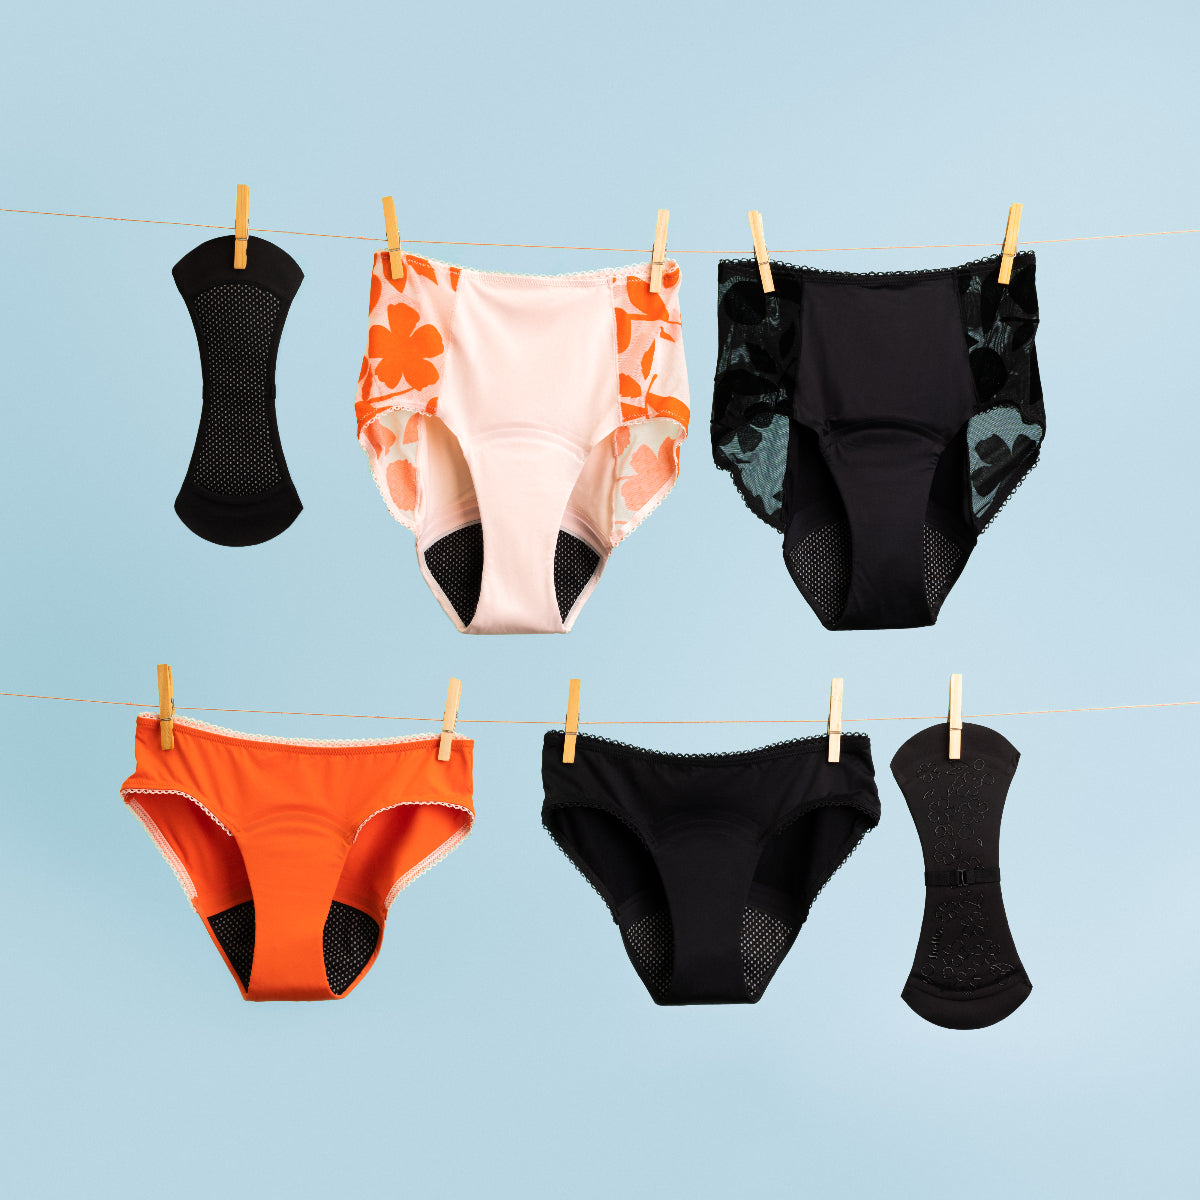 First Timer's Guide: Using Hello Undies or Hello Pads – Hello Period